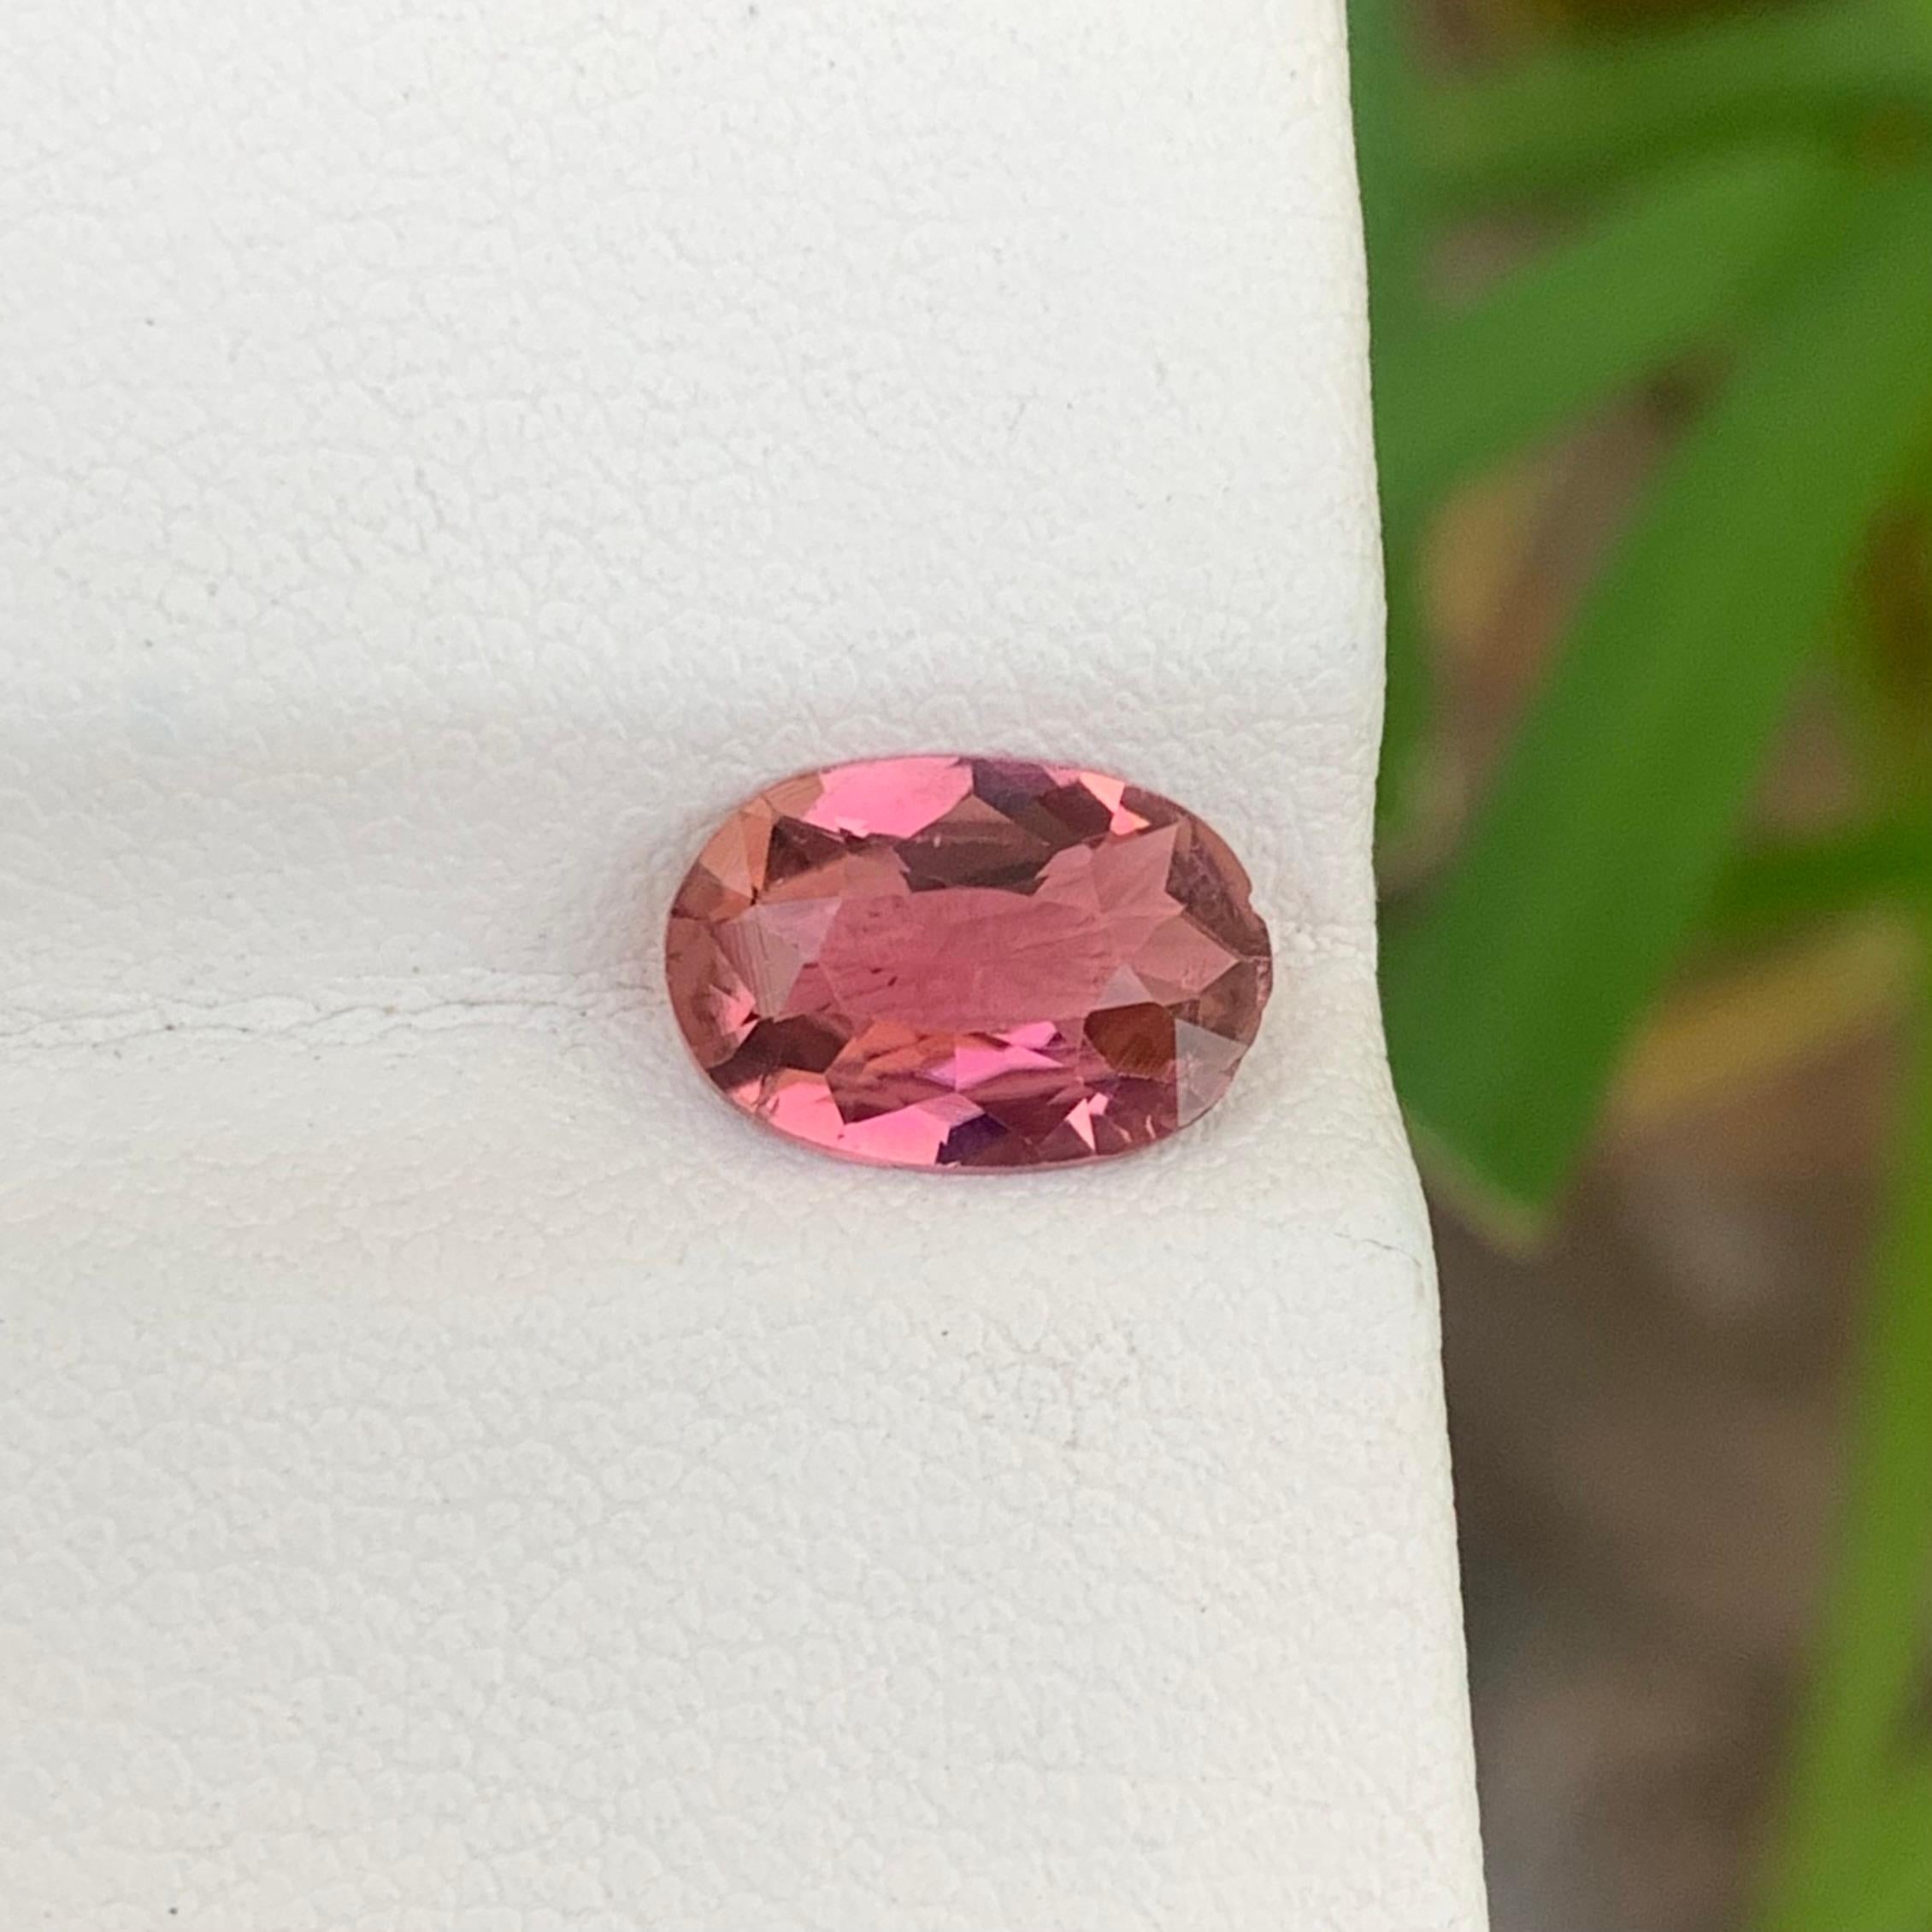 Faceted Tourmaline 
Weight: 1.60 Carats 
Dimension: 9.7x6.7x3.8 Mm
Origin: Africa
Shape: Oval
Color: Pink
Treatment: Non
Certificate: On Client Demand
Tourmaline is a captivating and versatile mineral that belongs to a complex group of boron